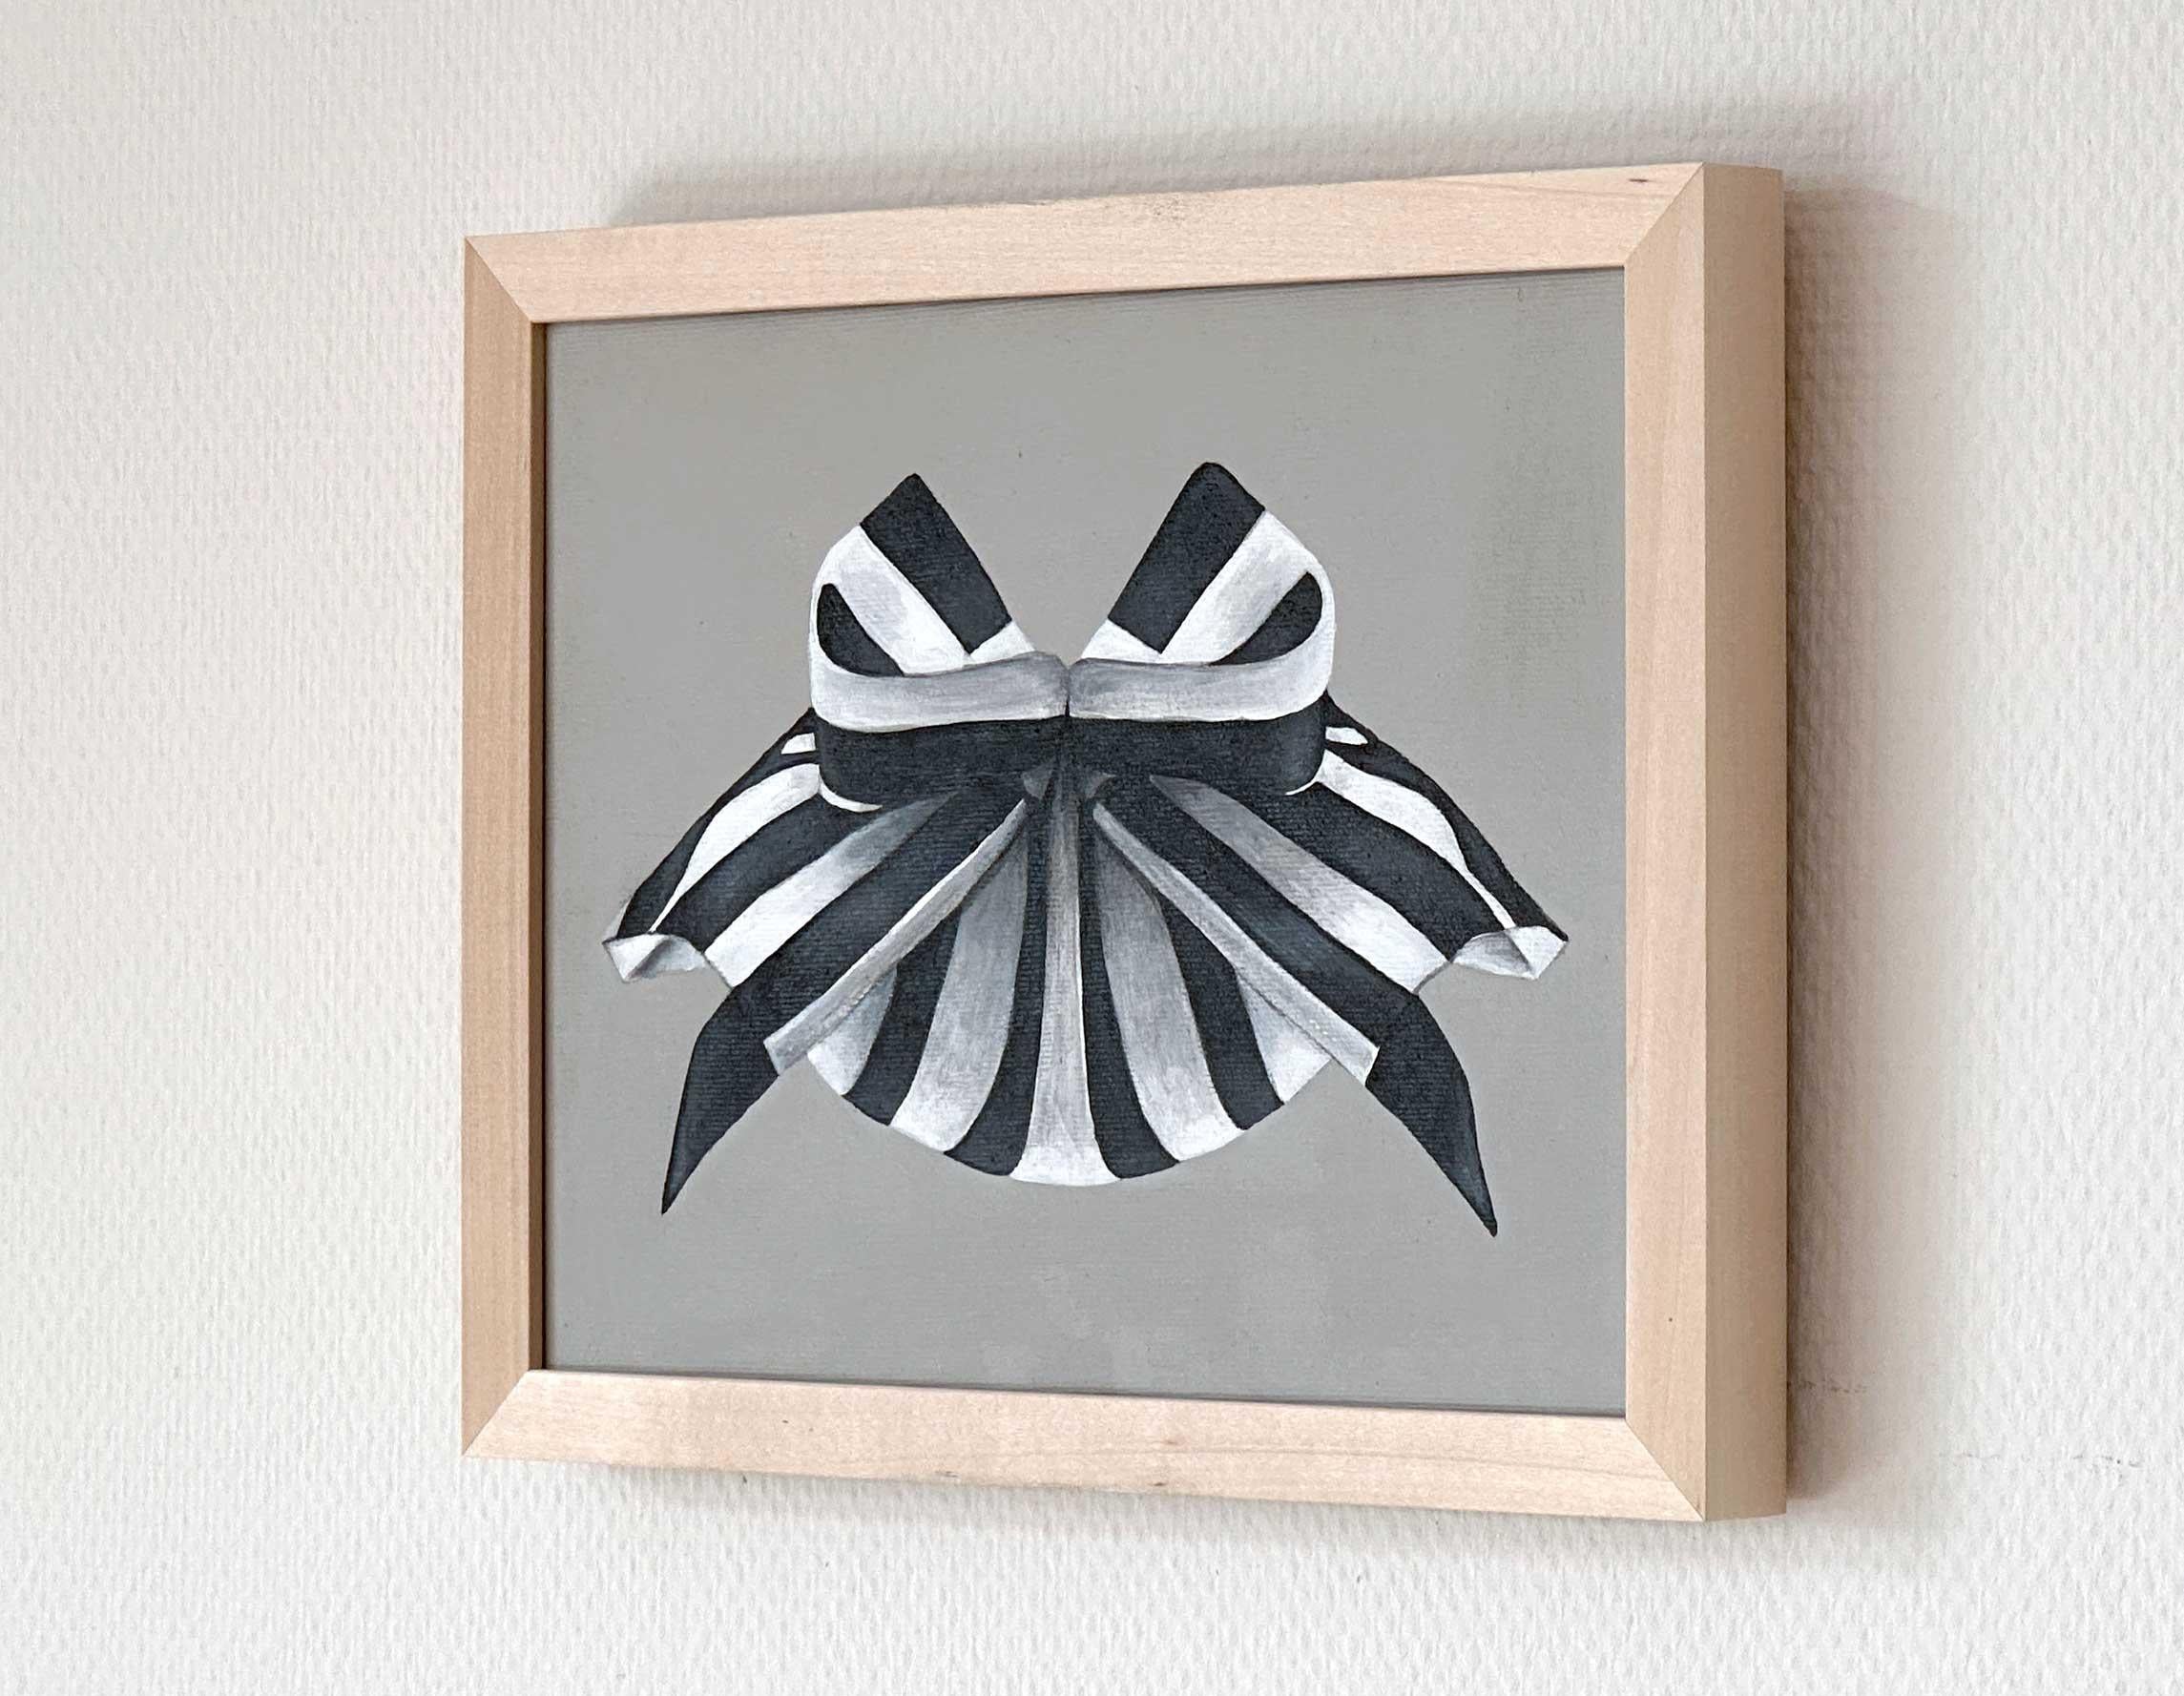 A small abstract painting made in 2023 by Amanda Andersen.
An elegant, intimate piece of art, depicting a delicate ribbon that is tied firmly in a structured, sharp, bow on a solid grey background. The contrasting black and white stripes are festive